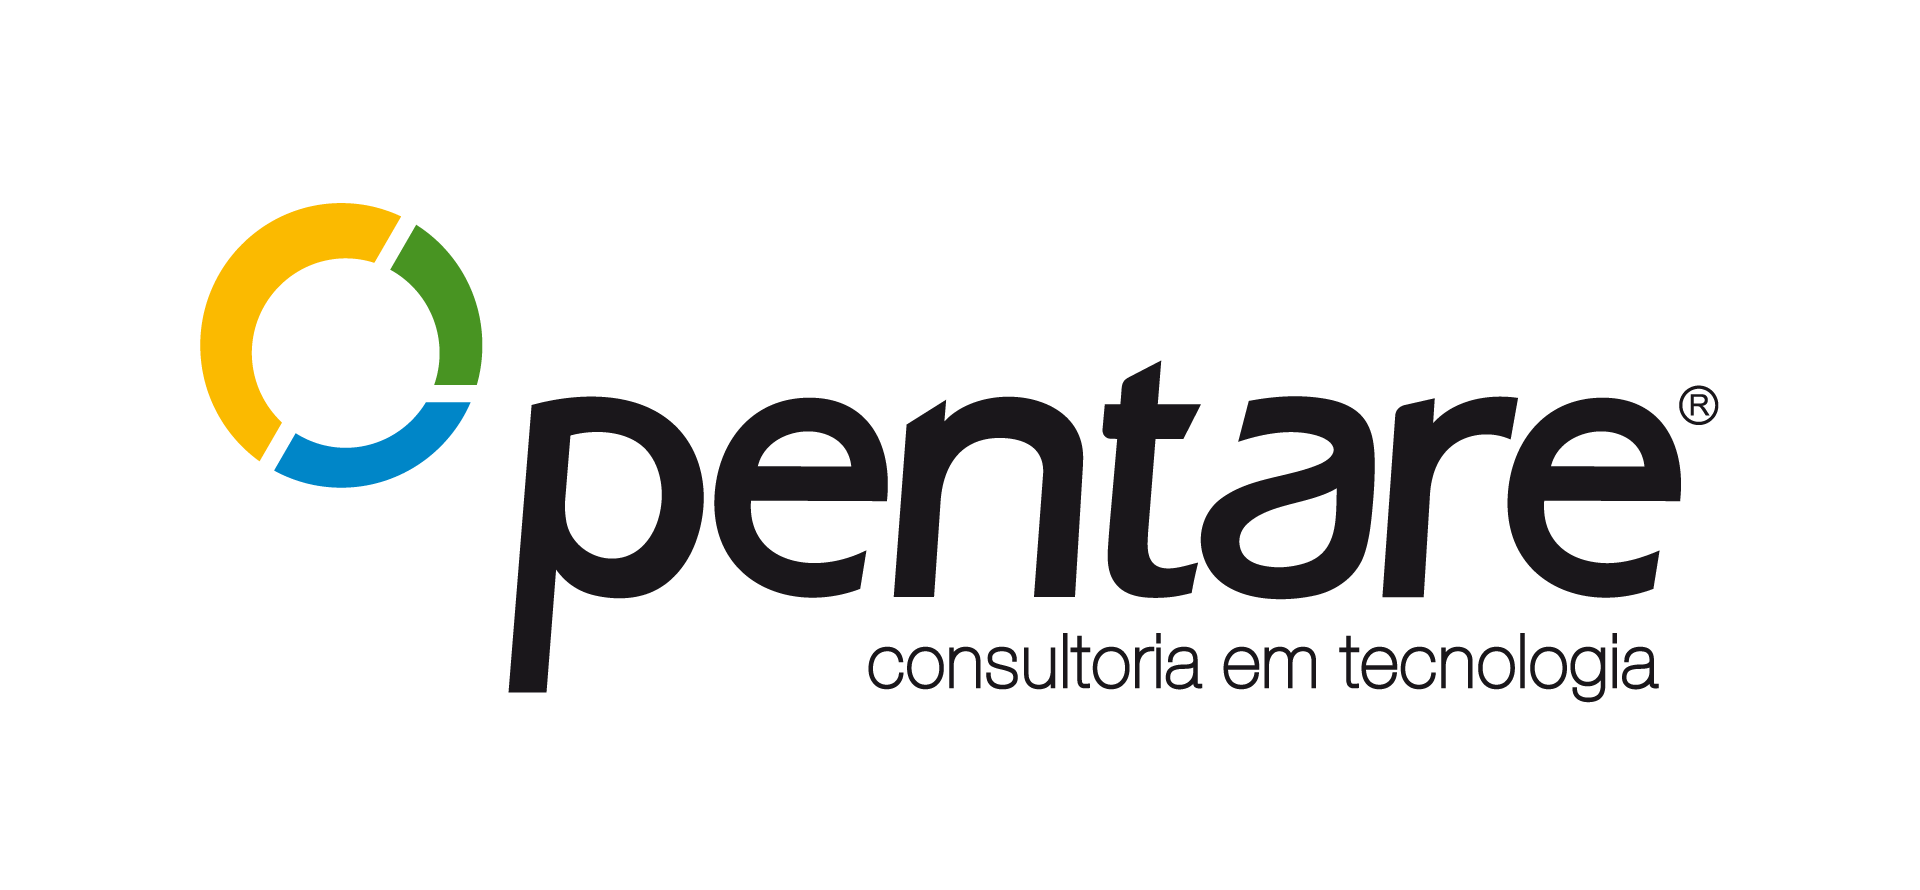 Pentare Technology Consulting Logo